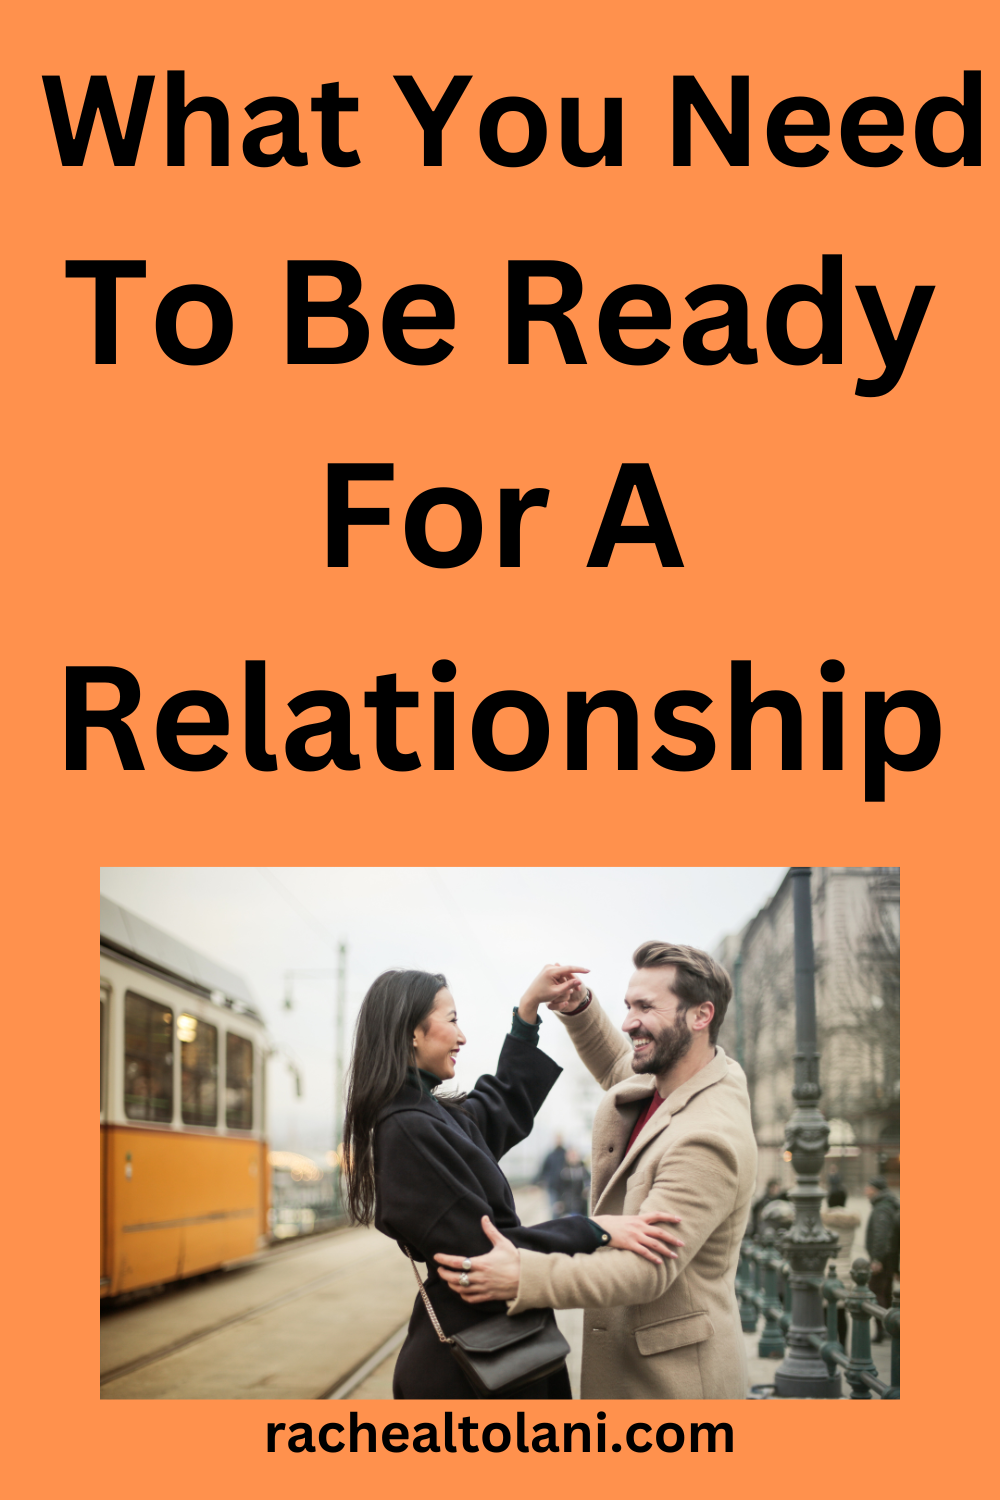 How To Be Ready For A Relationship